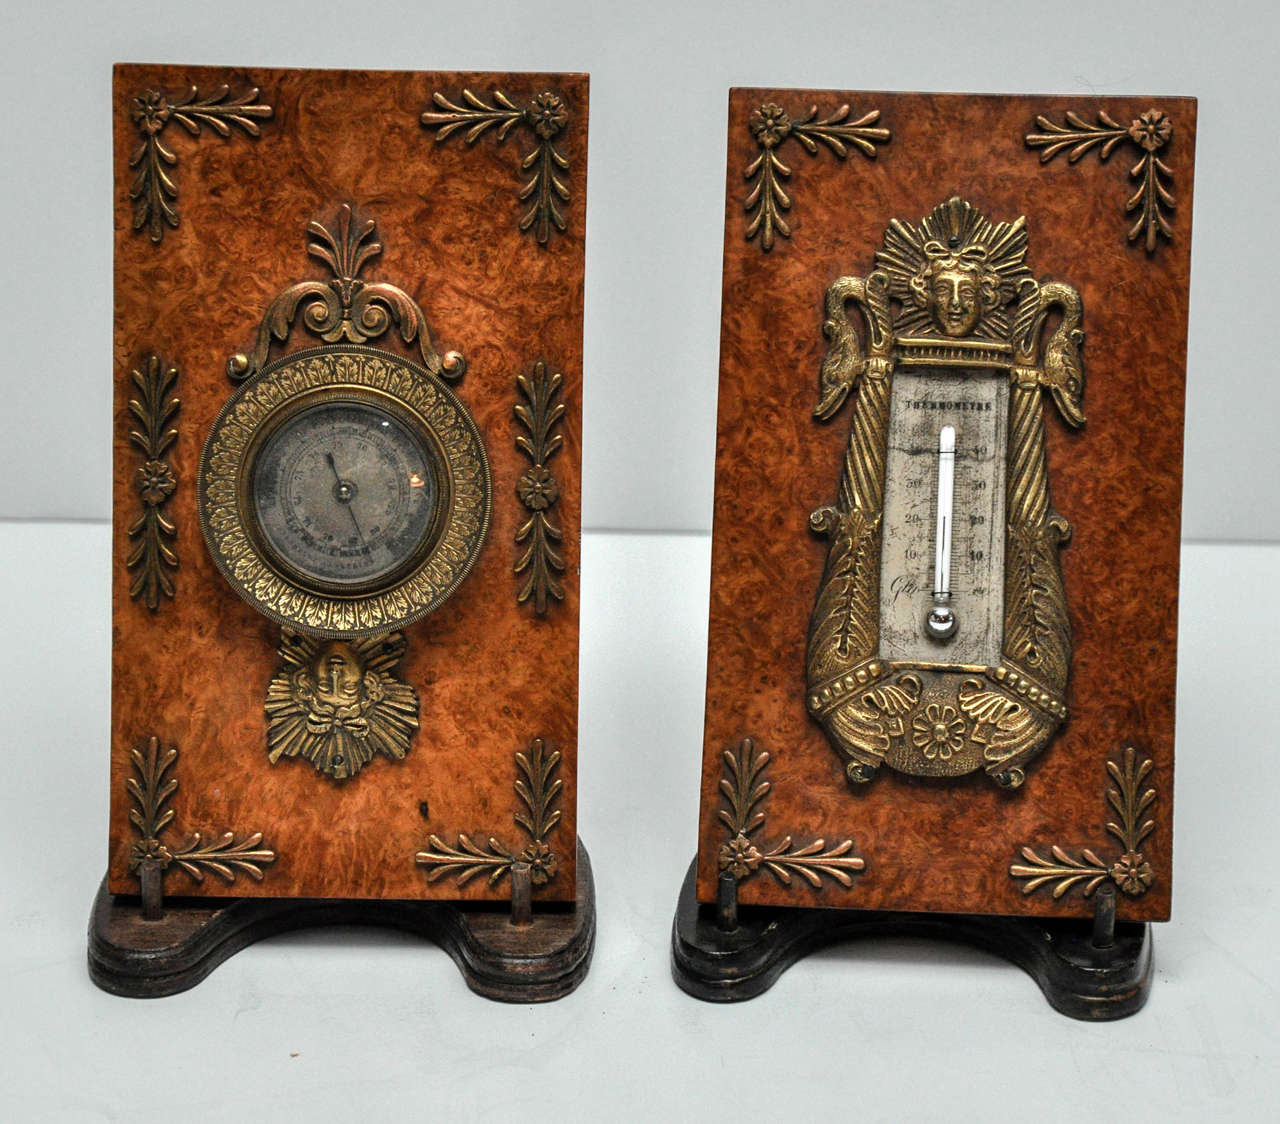 Empire mulberry wood, bronze and ormolu barometer and thermometer with silvered face, circa 1815.